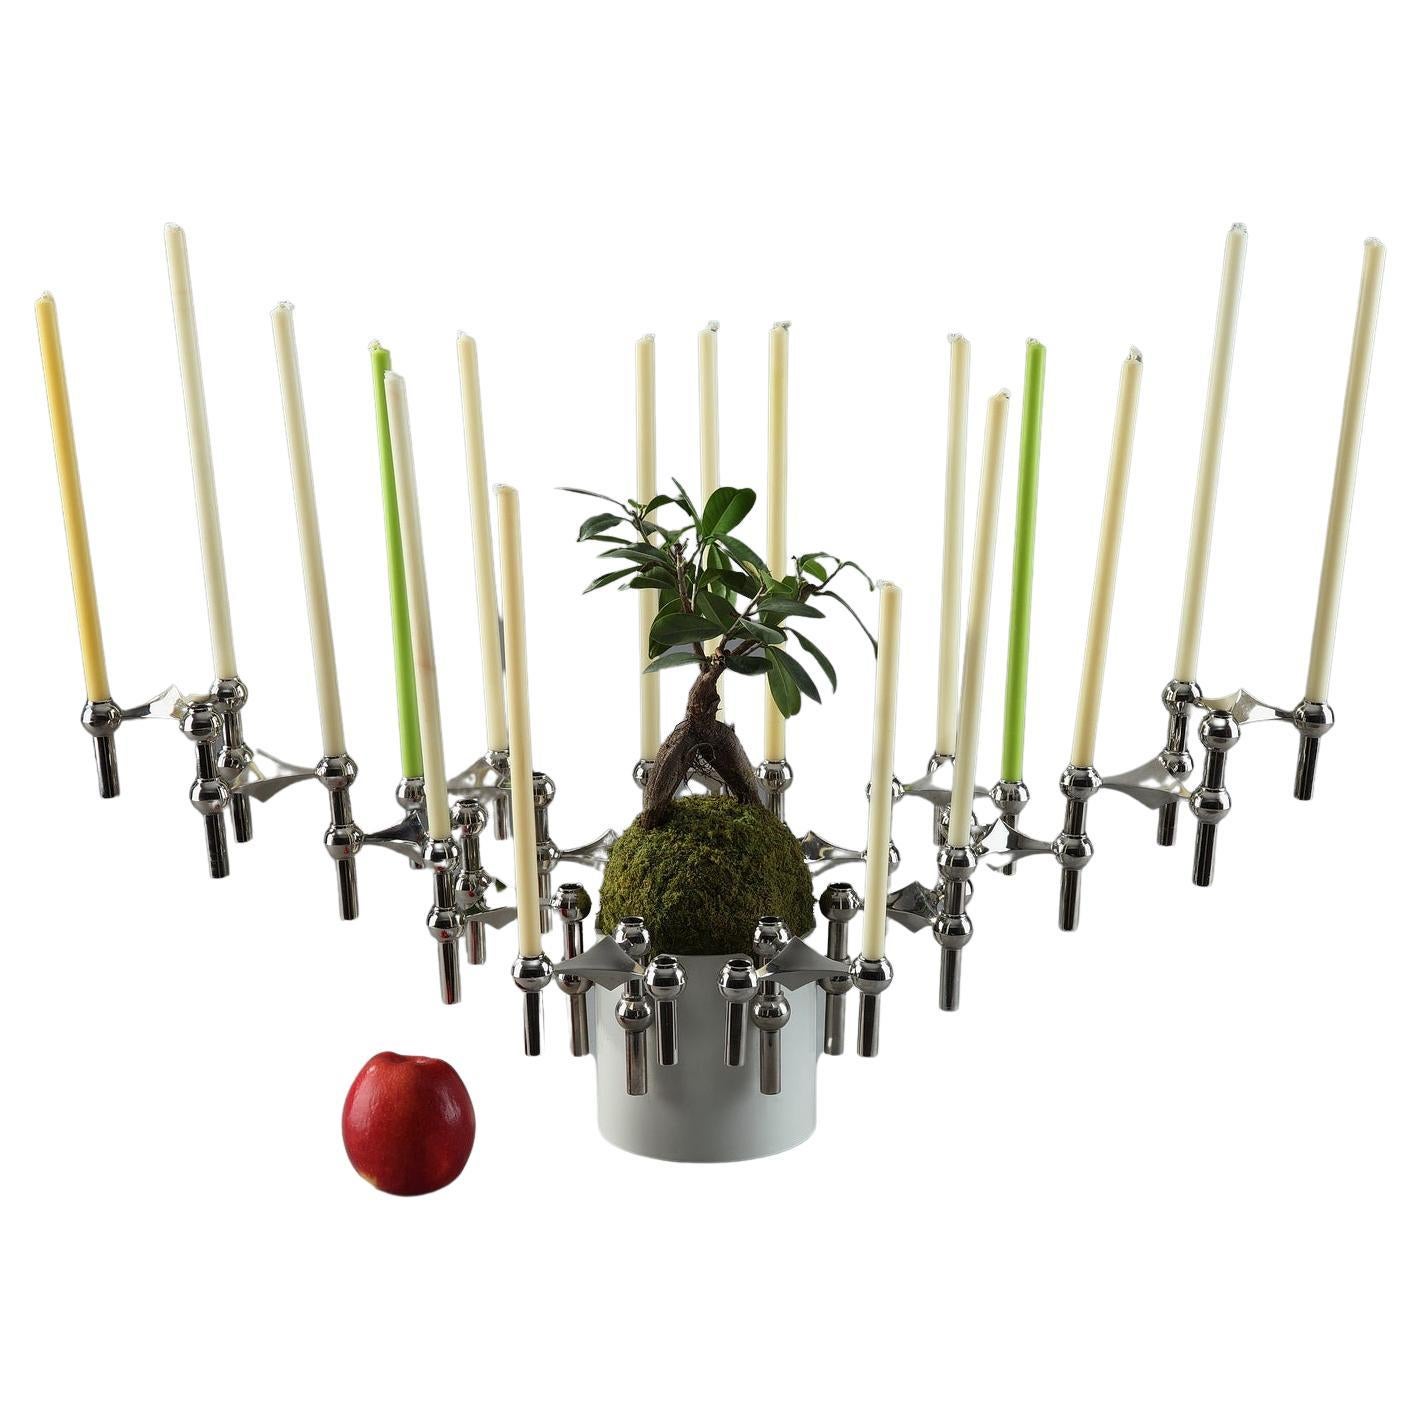 Set of 15 Piece Modular Candlestick and Jardinière by Nagel For Sale